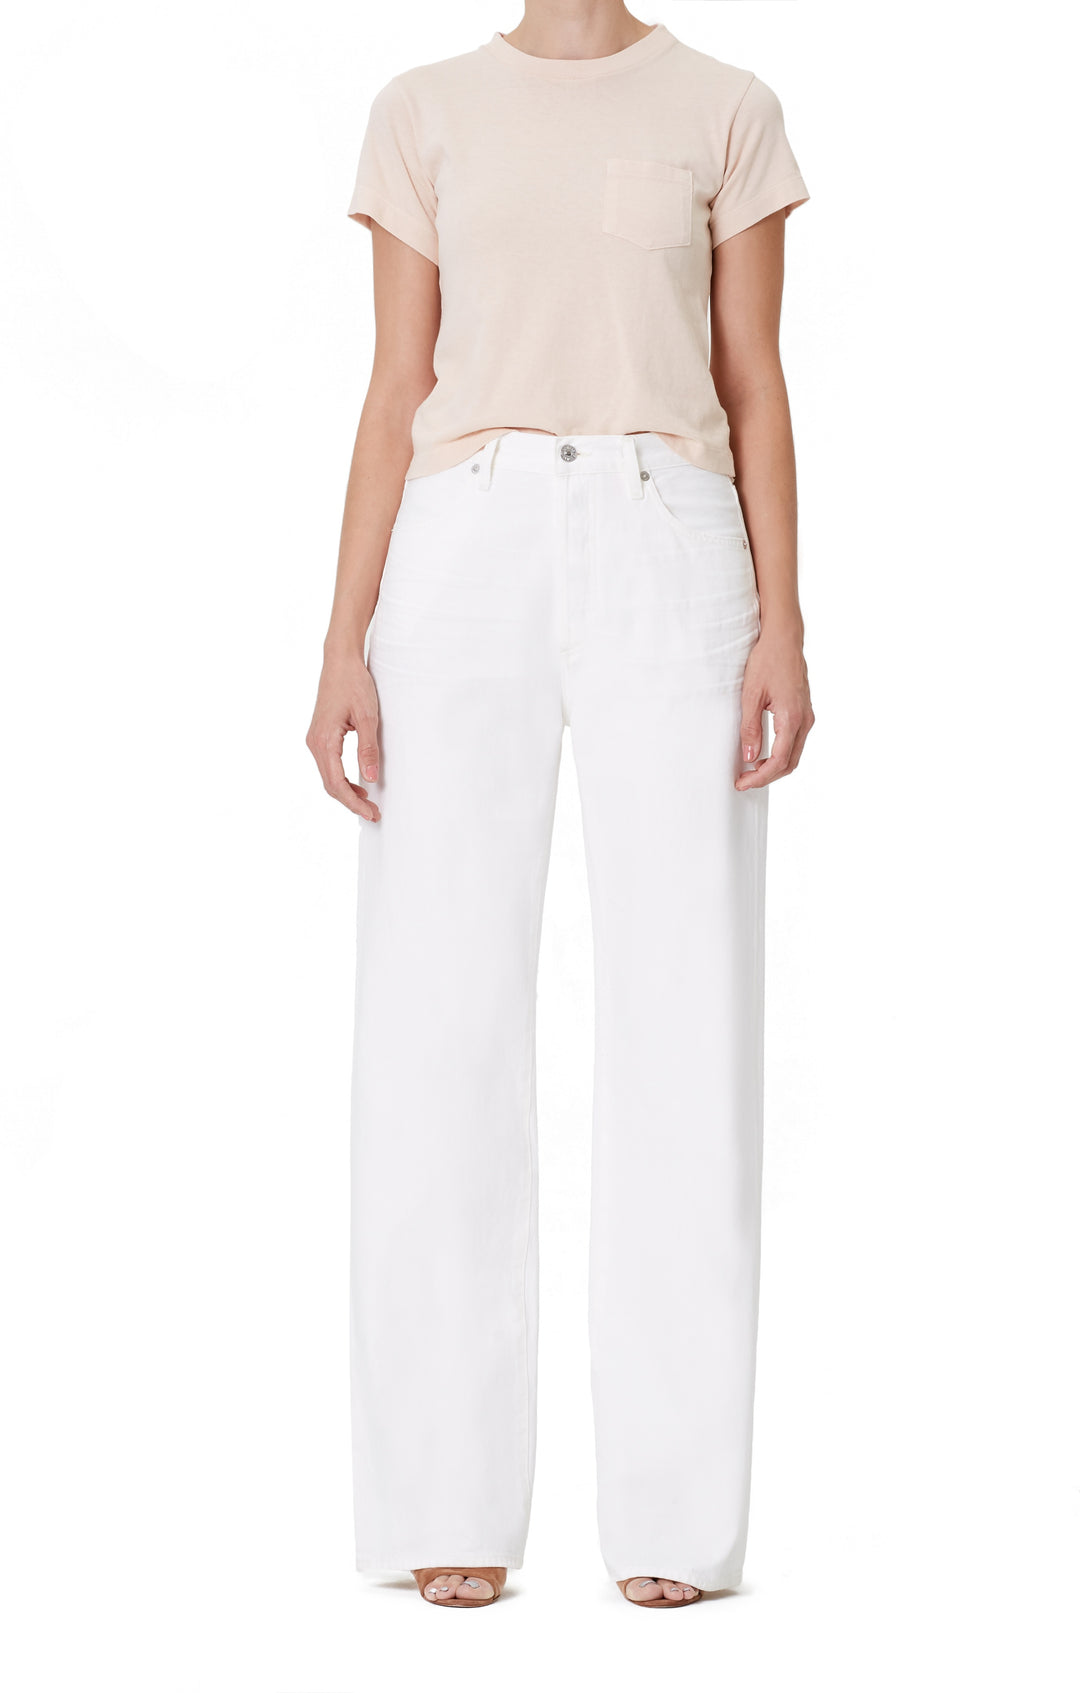 Citizens of Humanity - Annina Trouser Jean in Idyll